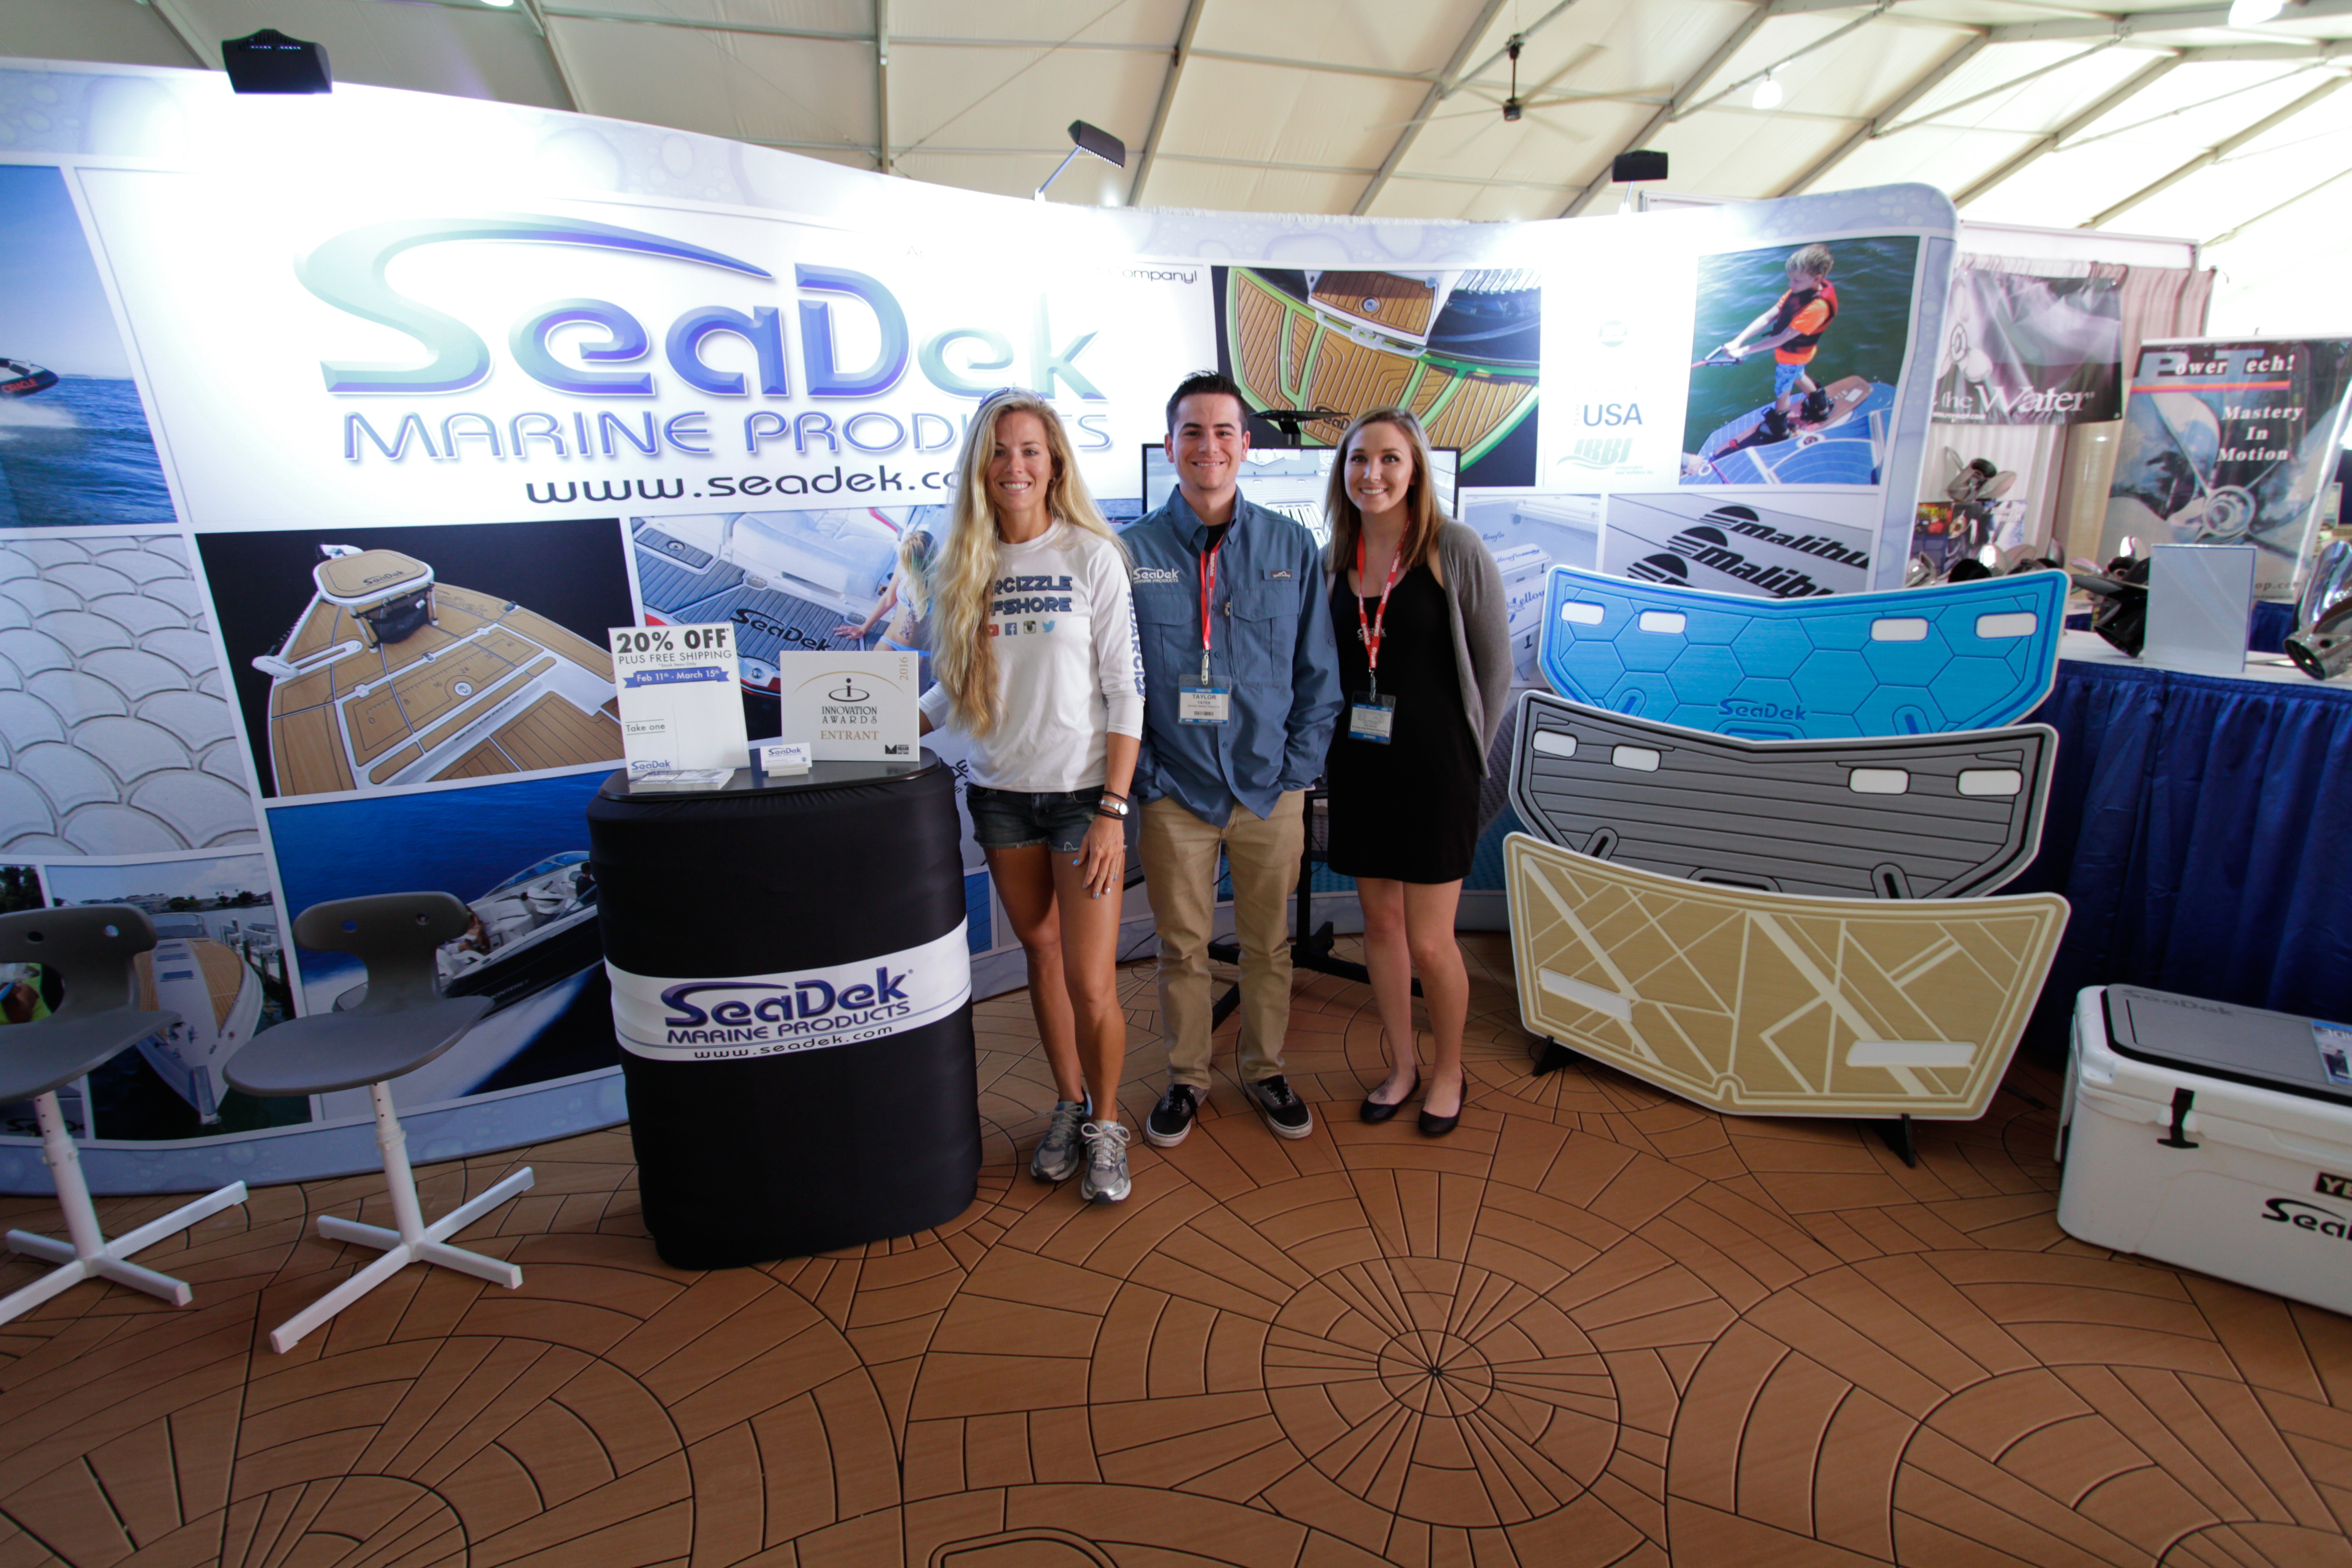 Brand ambassador, "Darcizzle", with the team from SeaDek